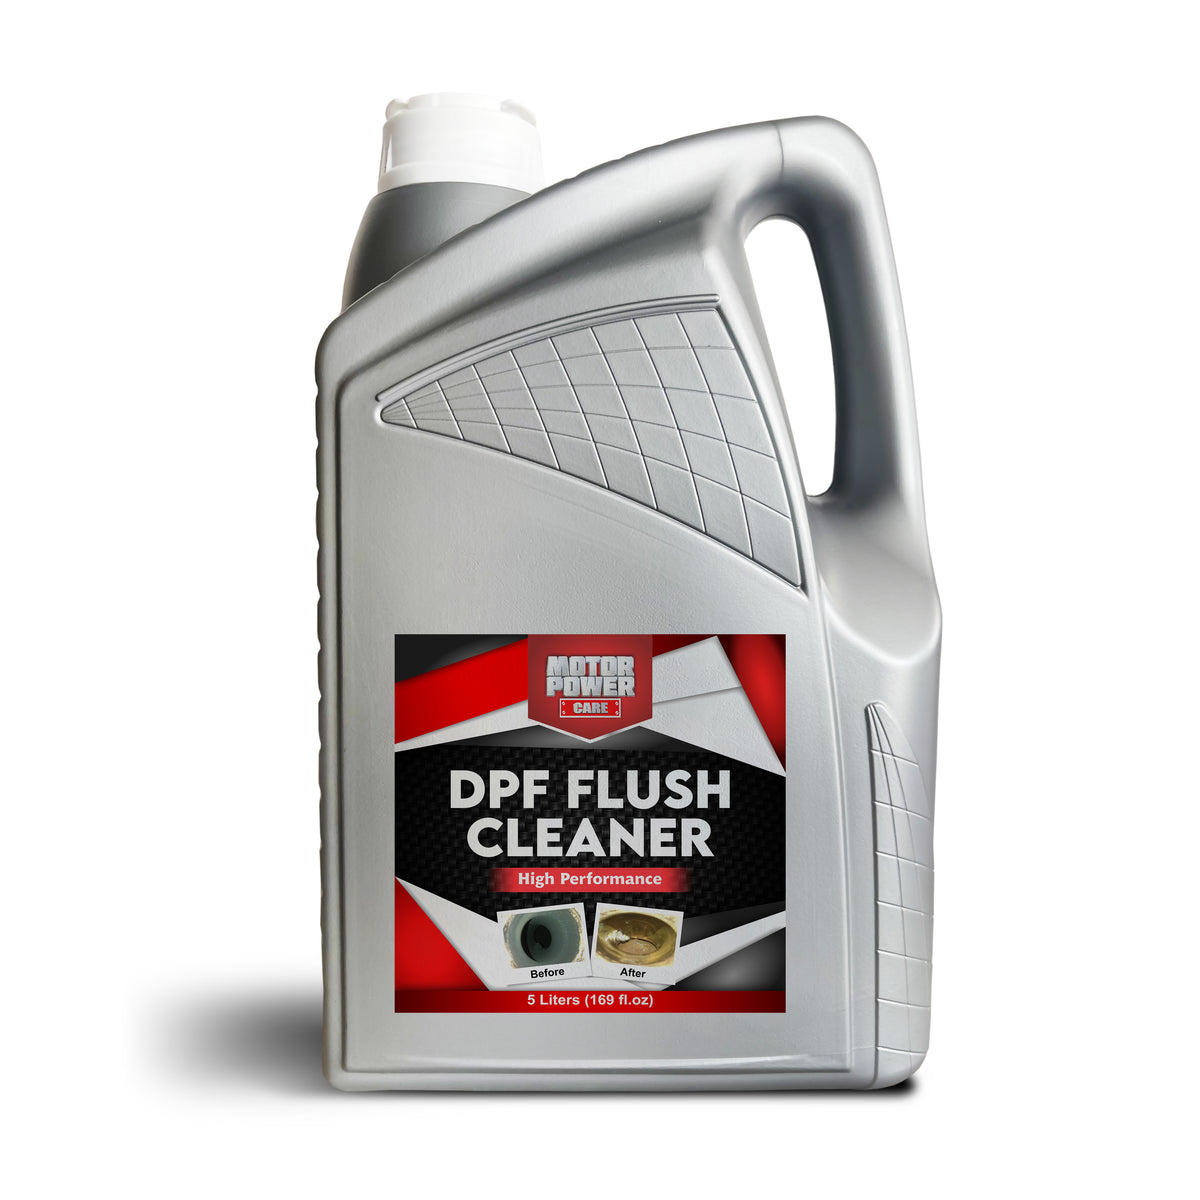 In-House DPF Cleaner Save Time and Money with Our Revolutionary